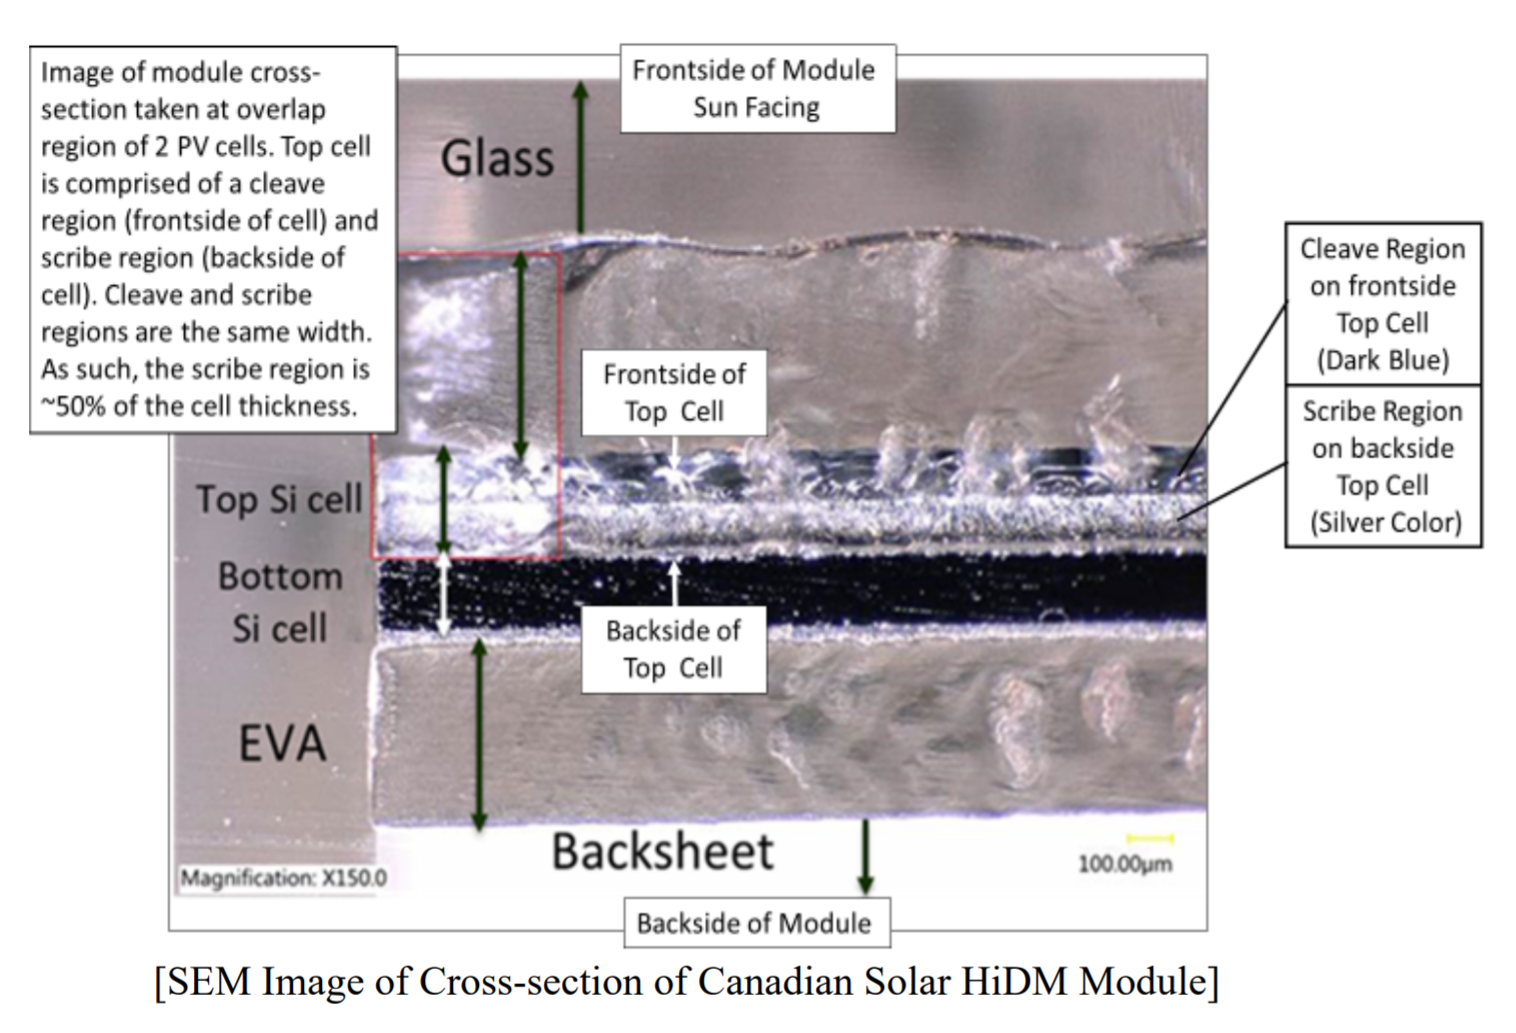 image of cross-section of Canadian Solar HiDM module